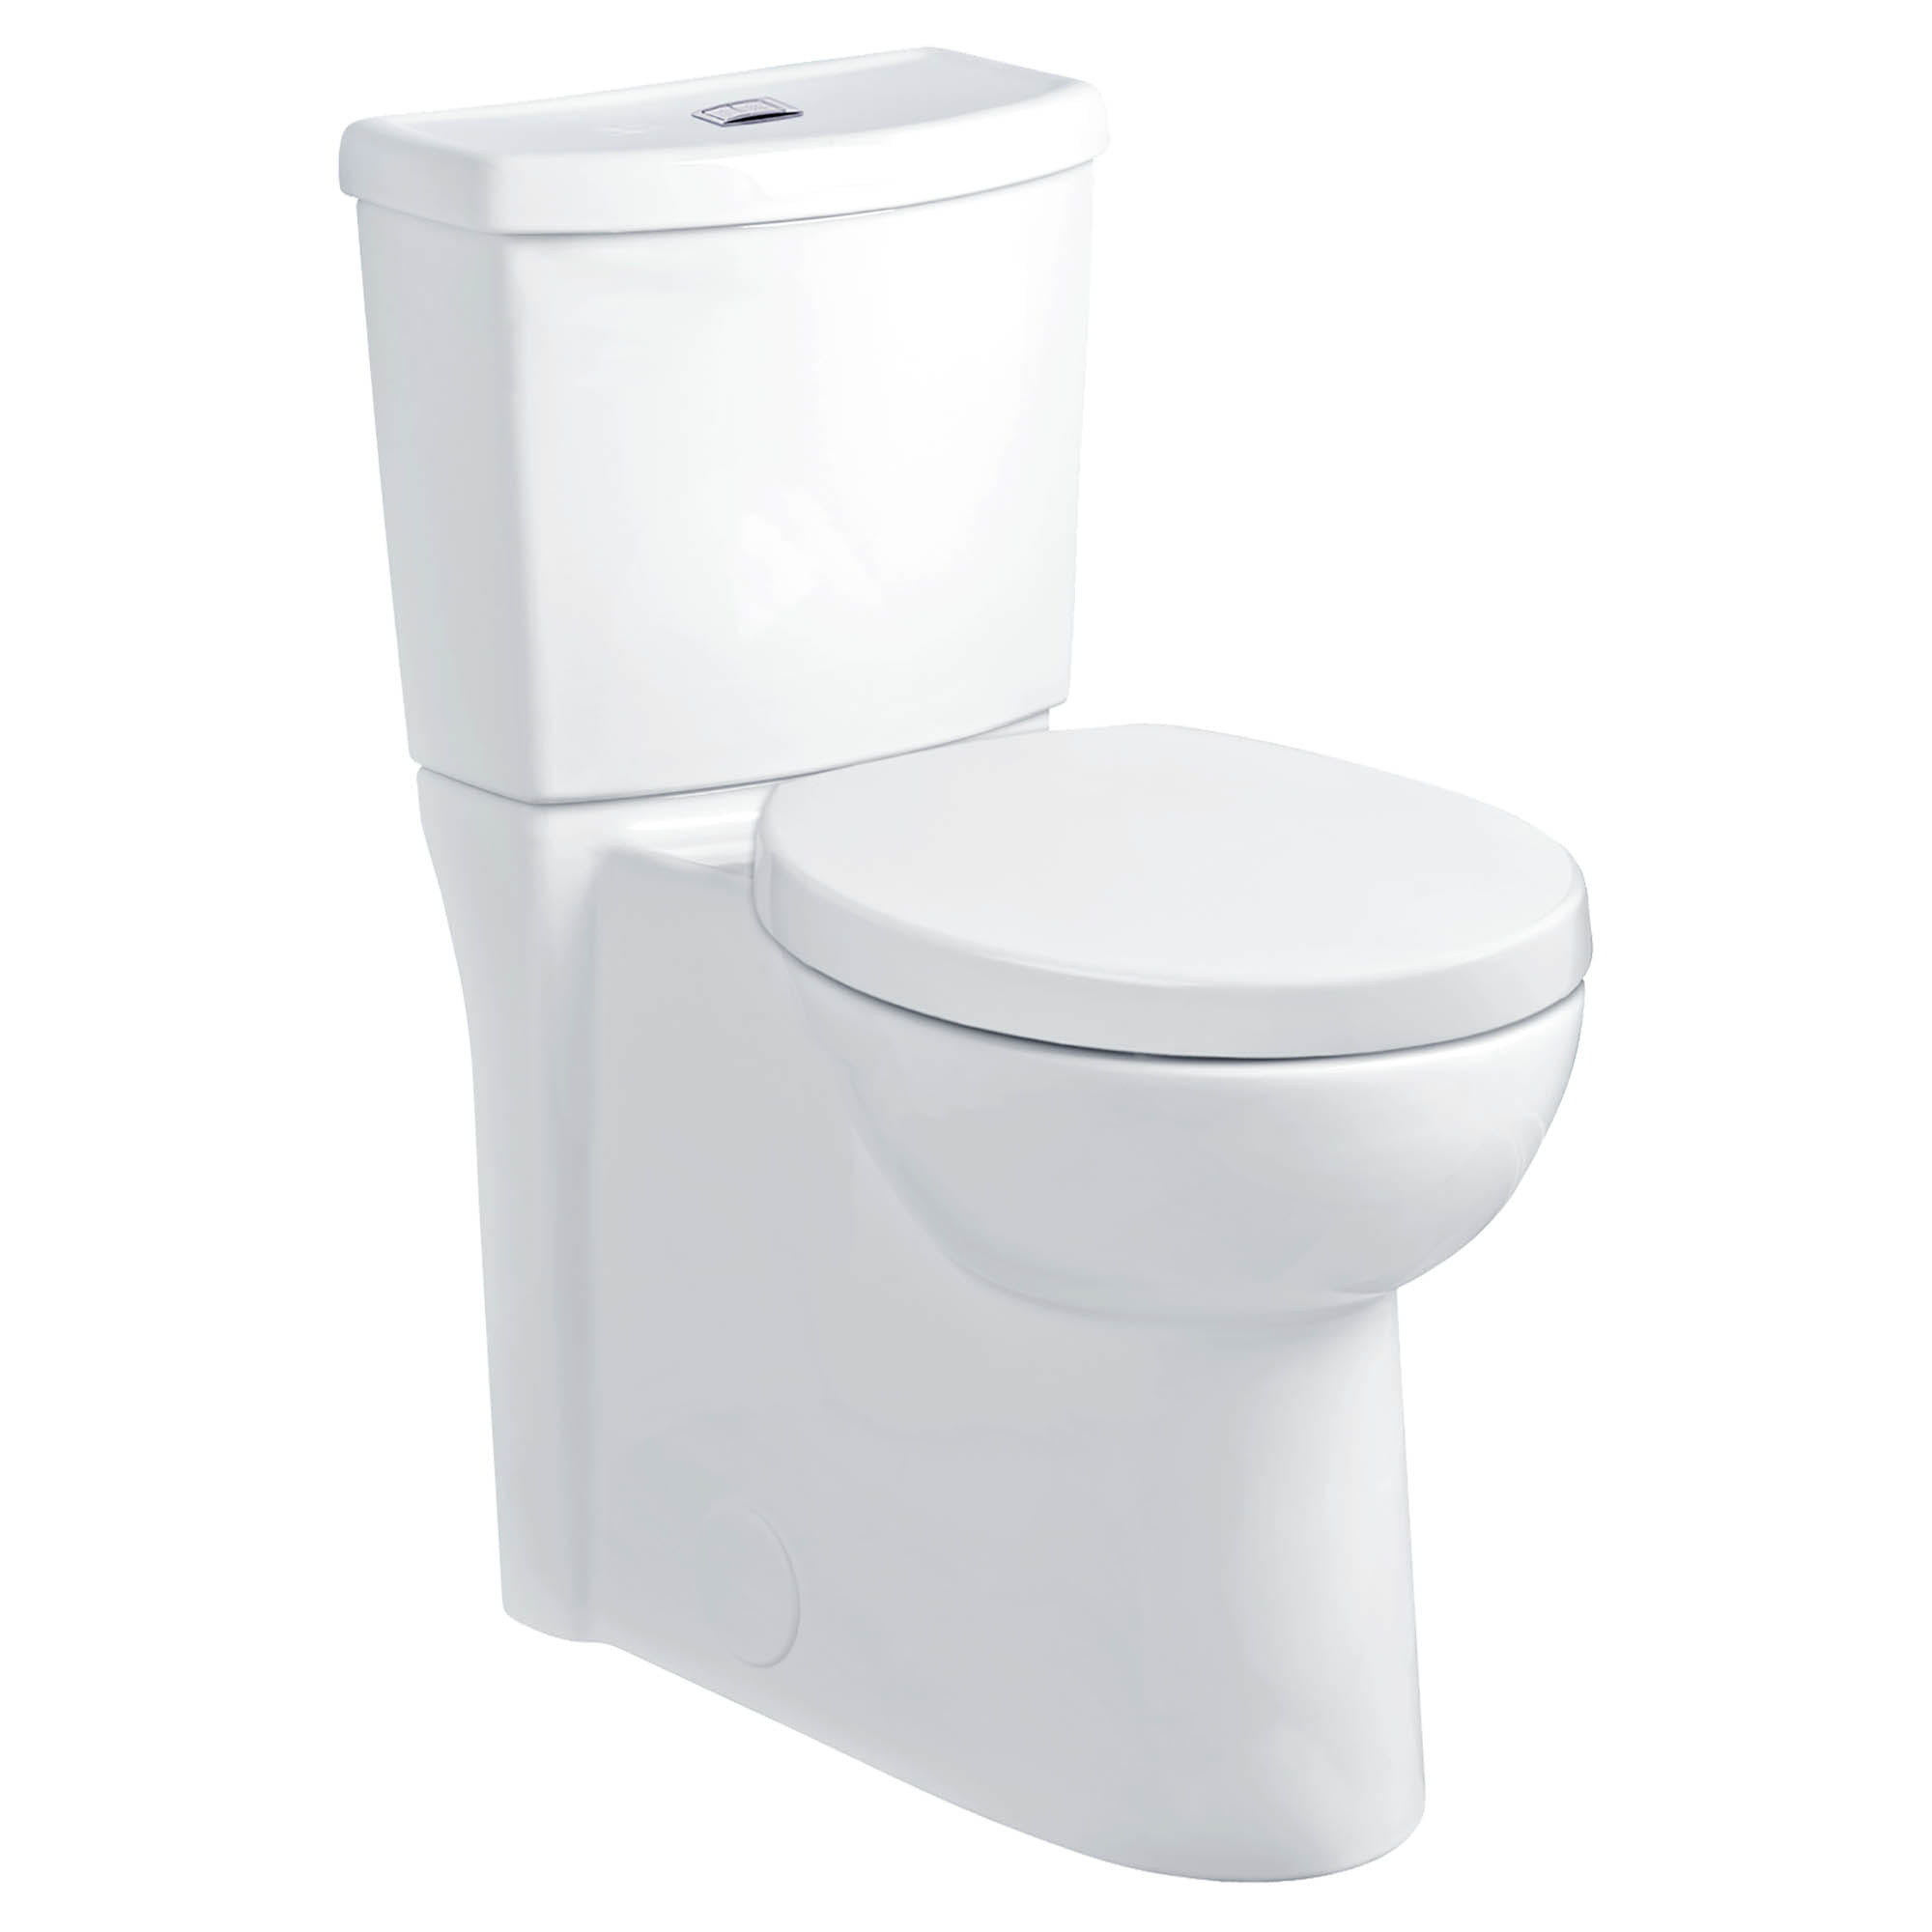 Alice tegel realiteit Studio Skirted Two-Piece Dual Flush 1.6 gpf/6.0 Lpf and 1.1 gpf/4.2 Lpf  Chair Height Round Front Toilet With Seat